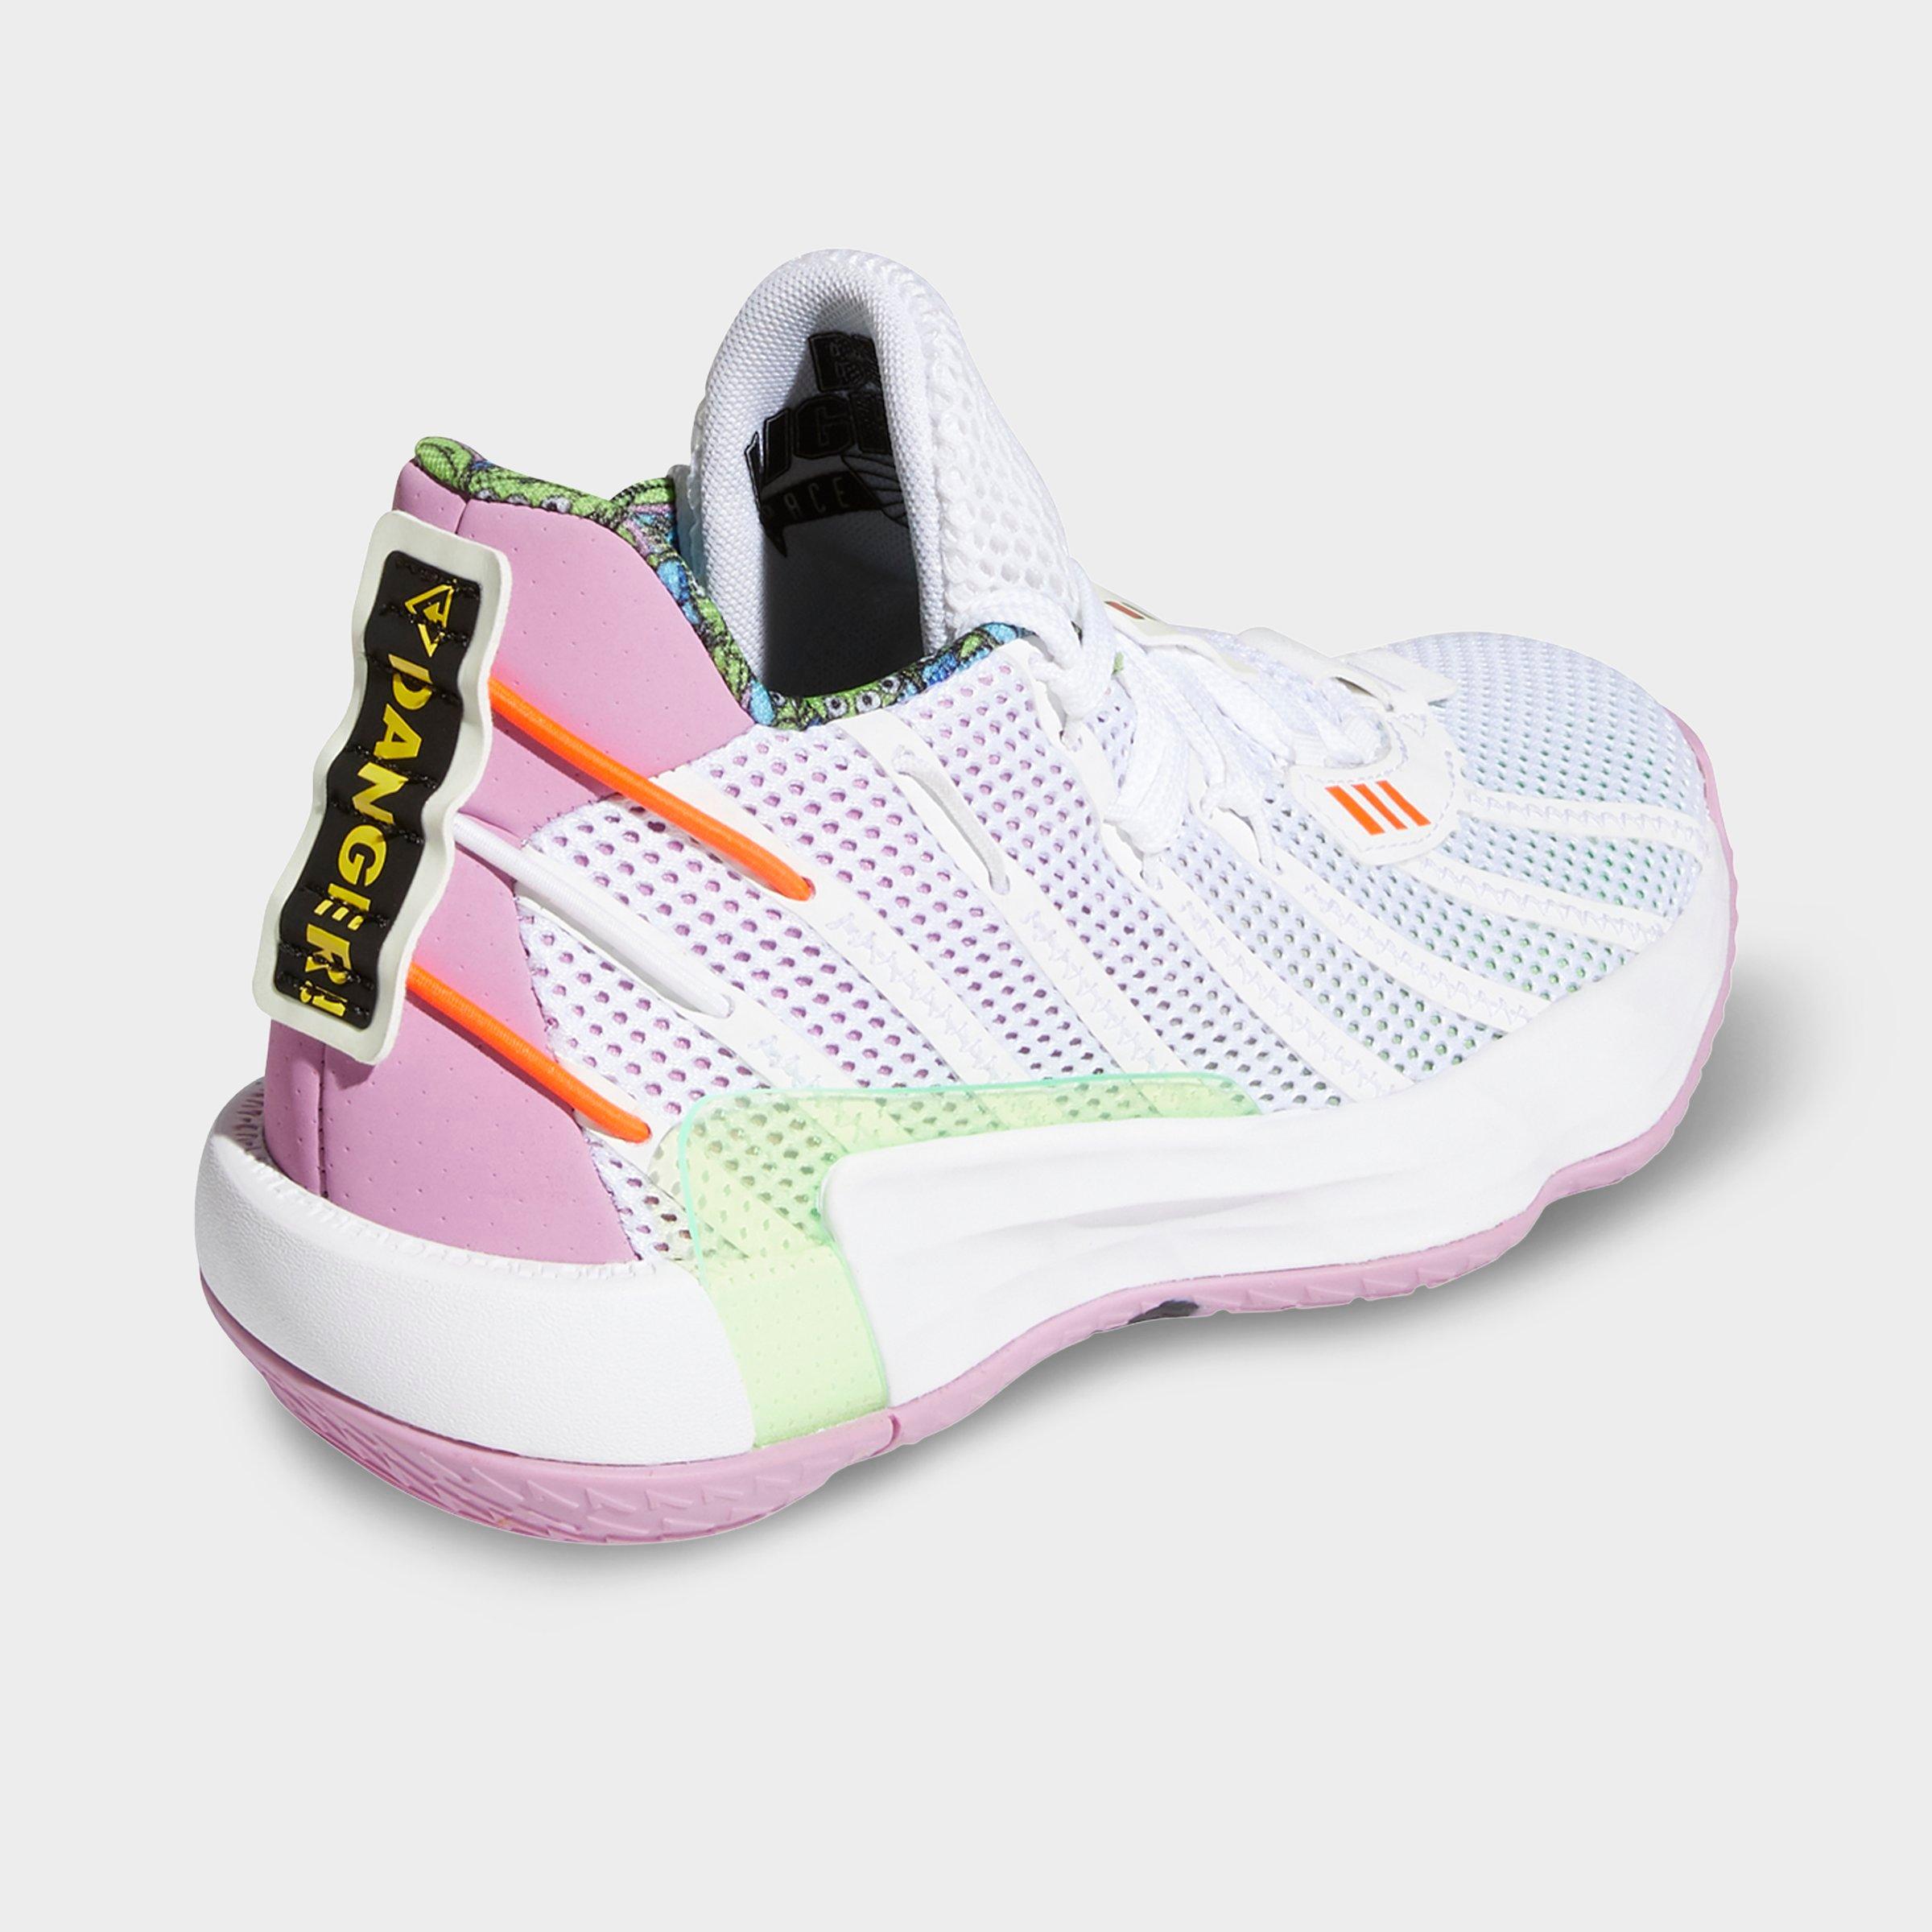 dame 7 x buzz toy story shoes